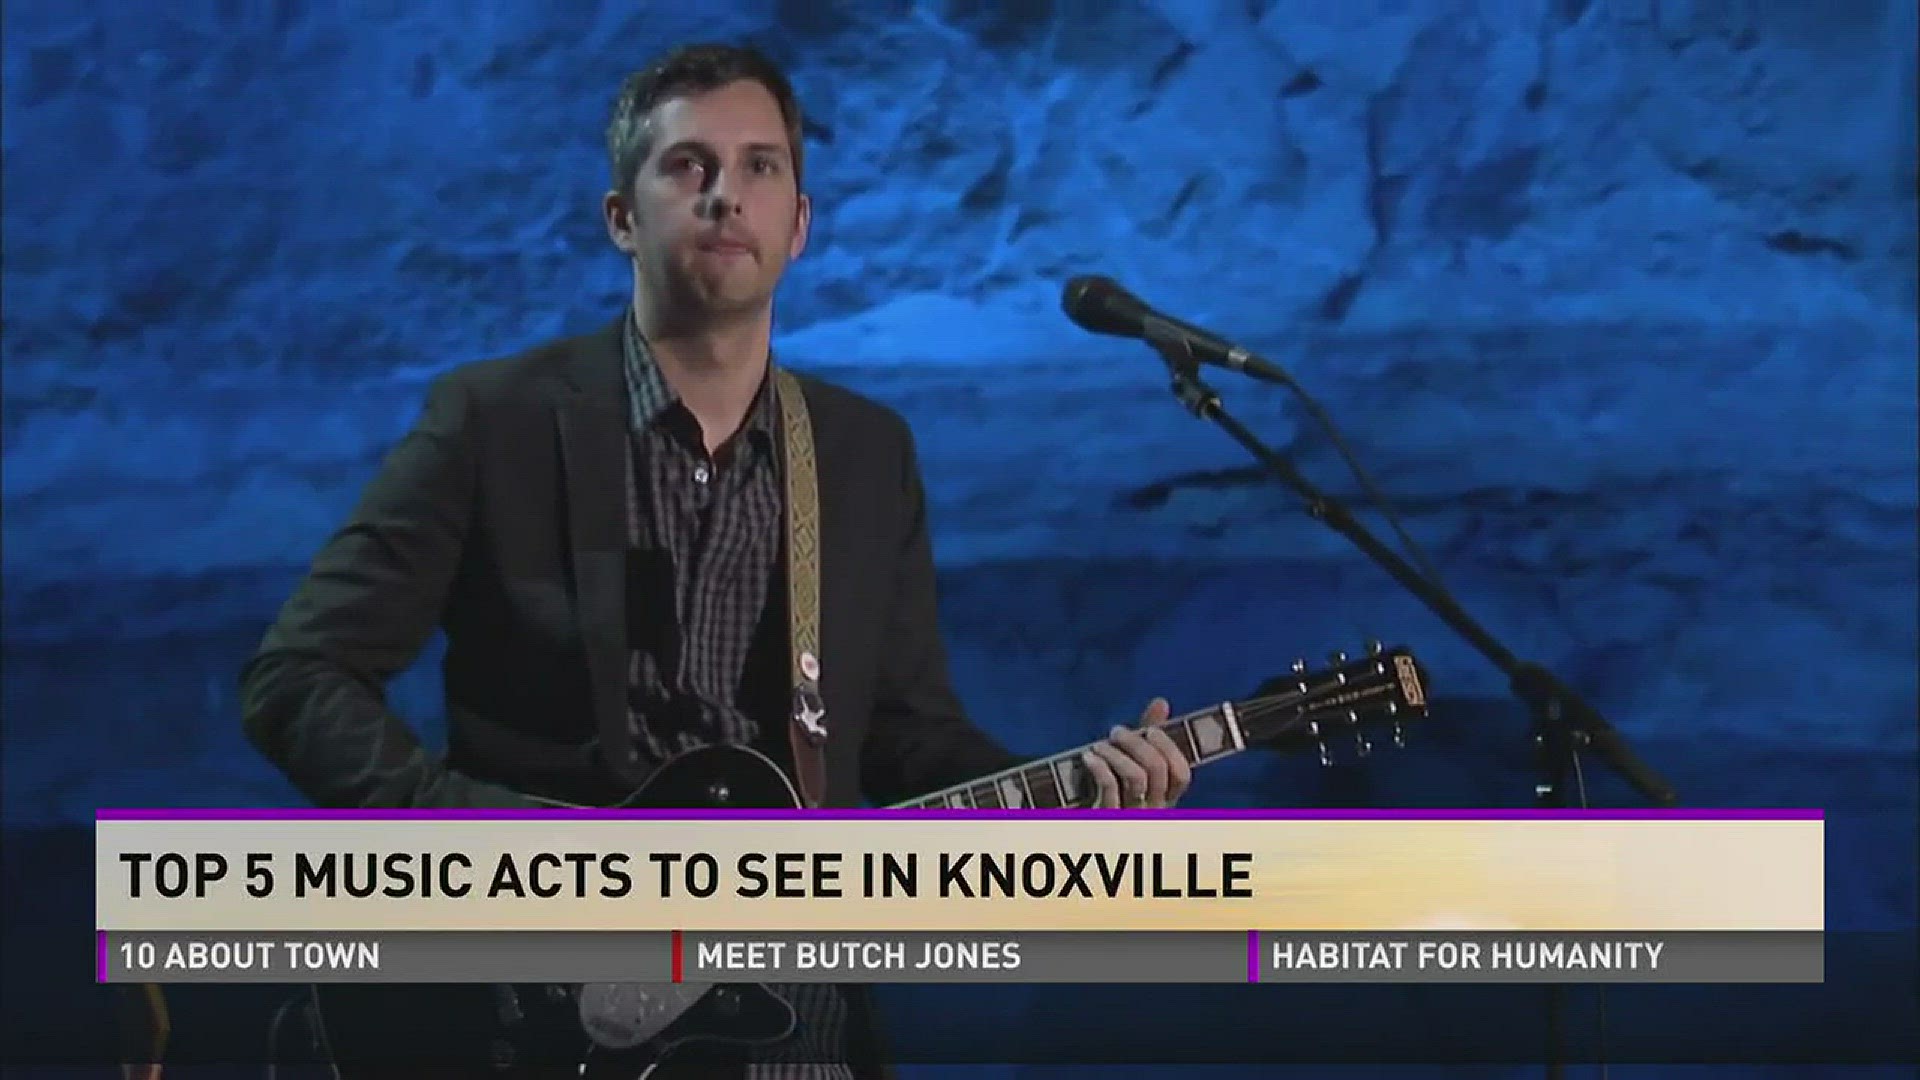 Top 5 Music Acts To See In Knoxville